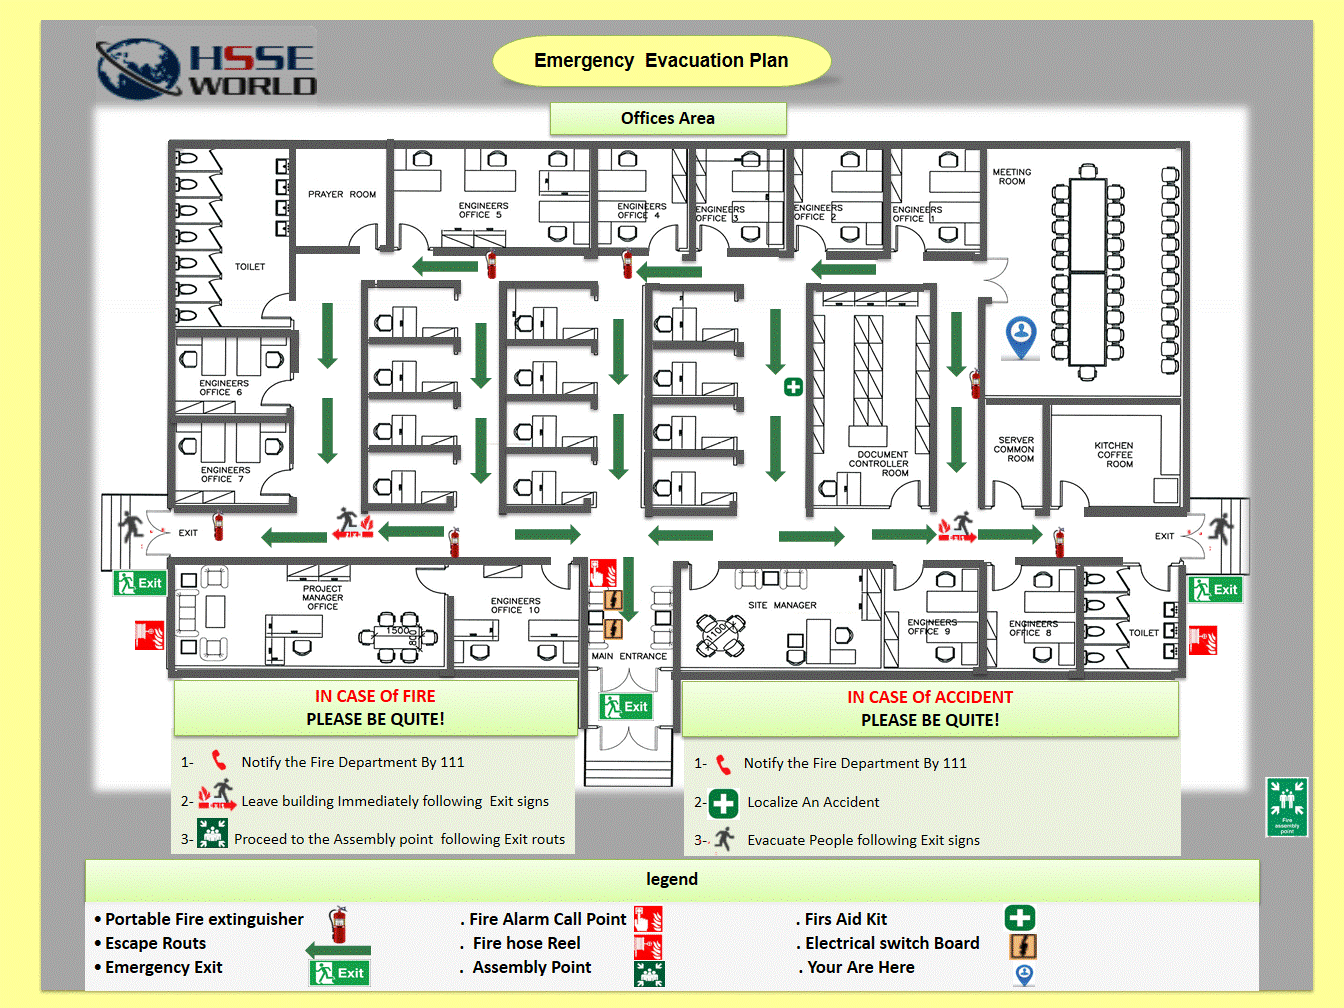 Fire Emergency Evacuation Plan and the Fire Procedure 